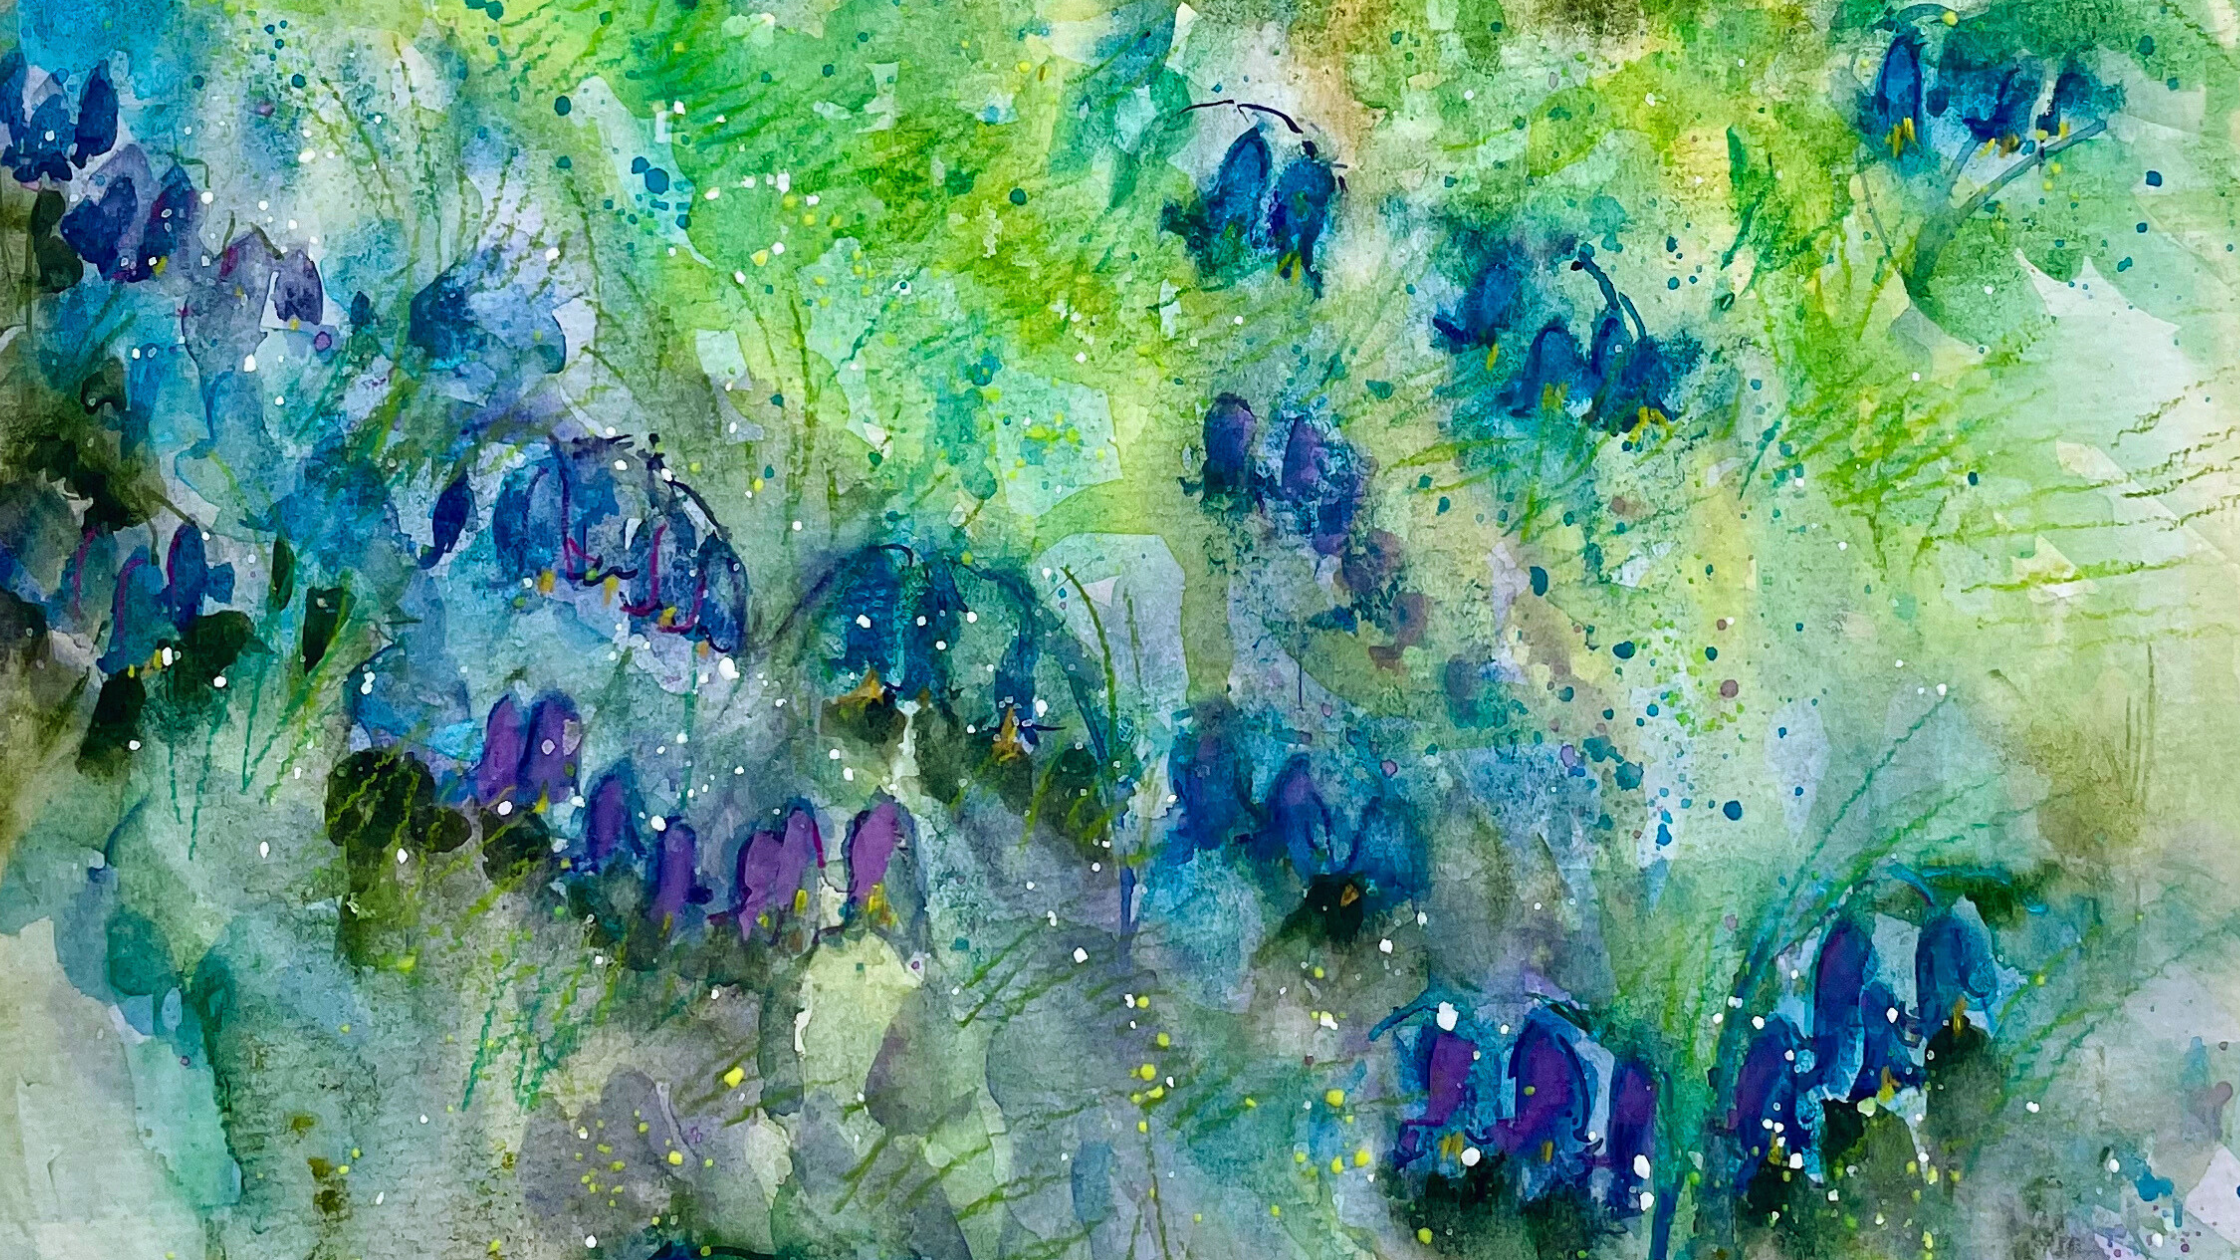 New Watercolour Wonder Date Added: Saturday, 18th May (10:00)